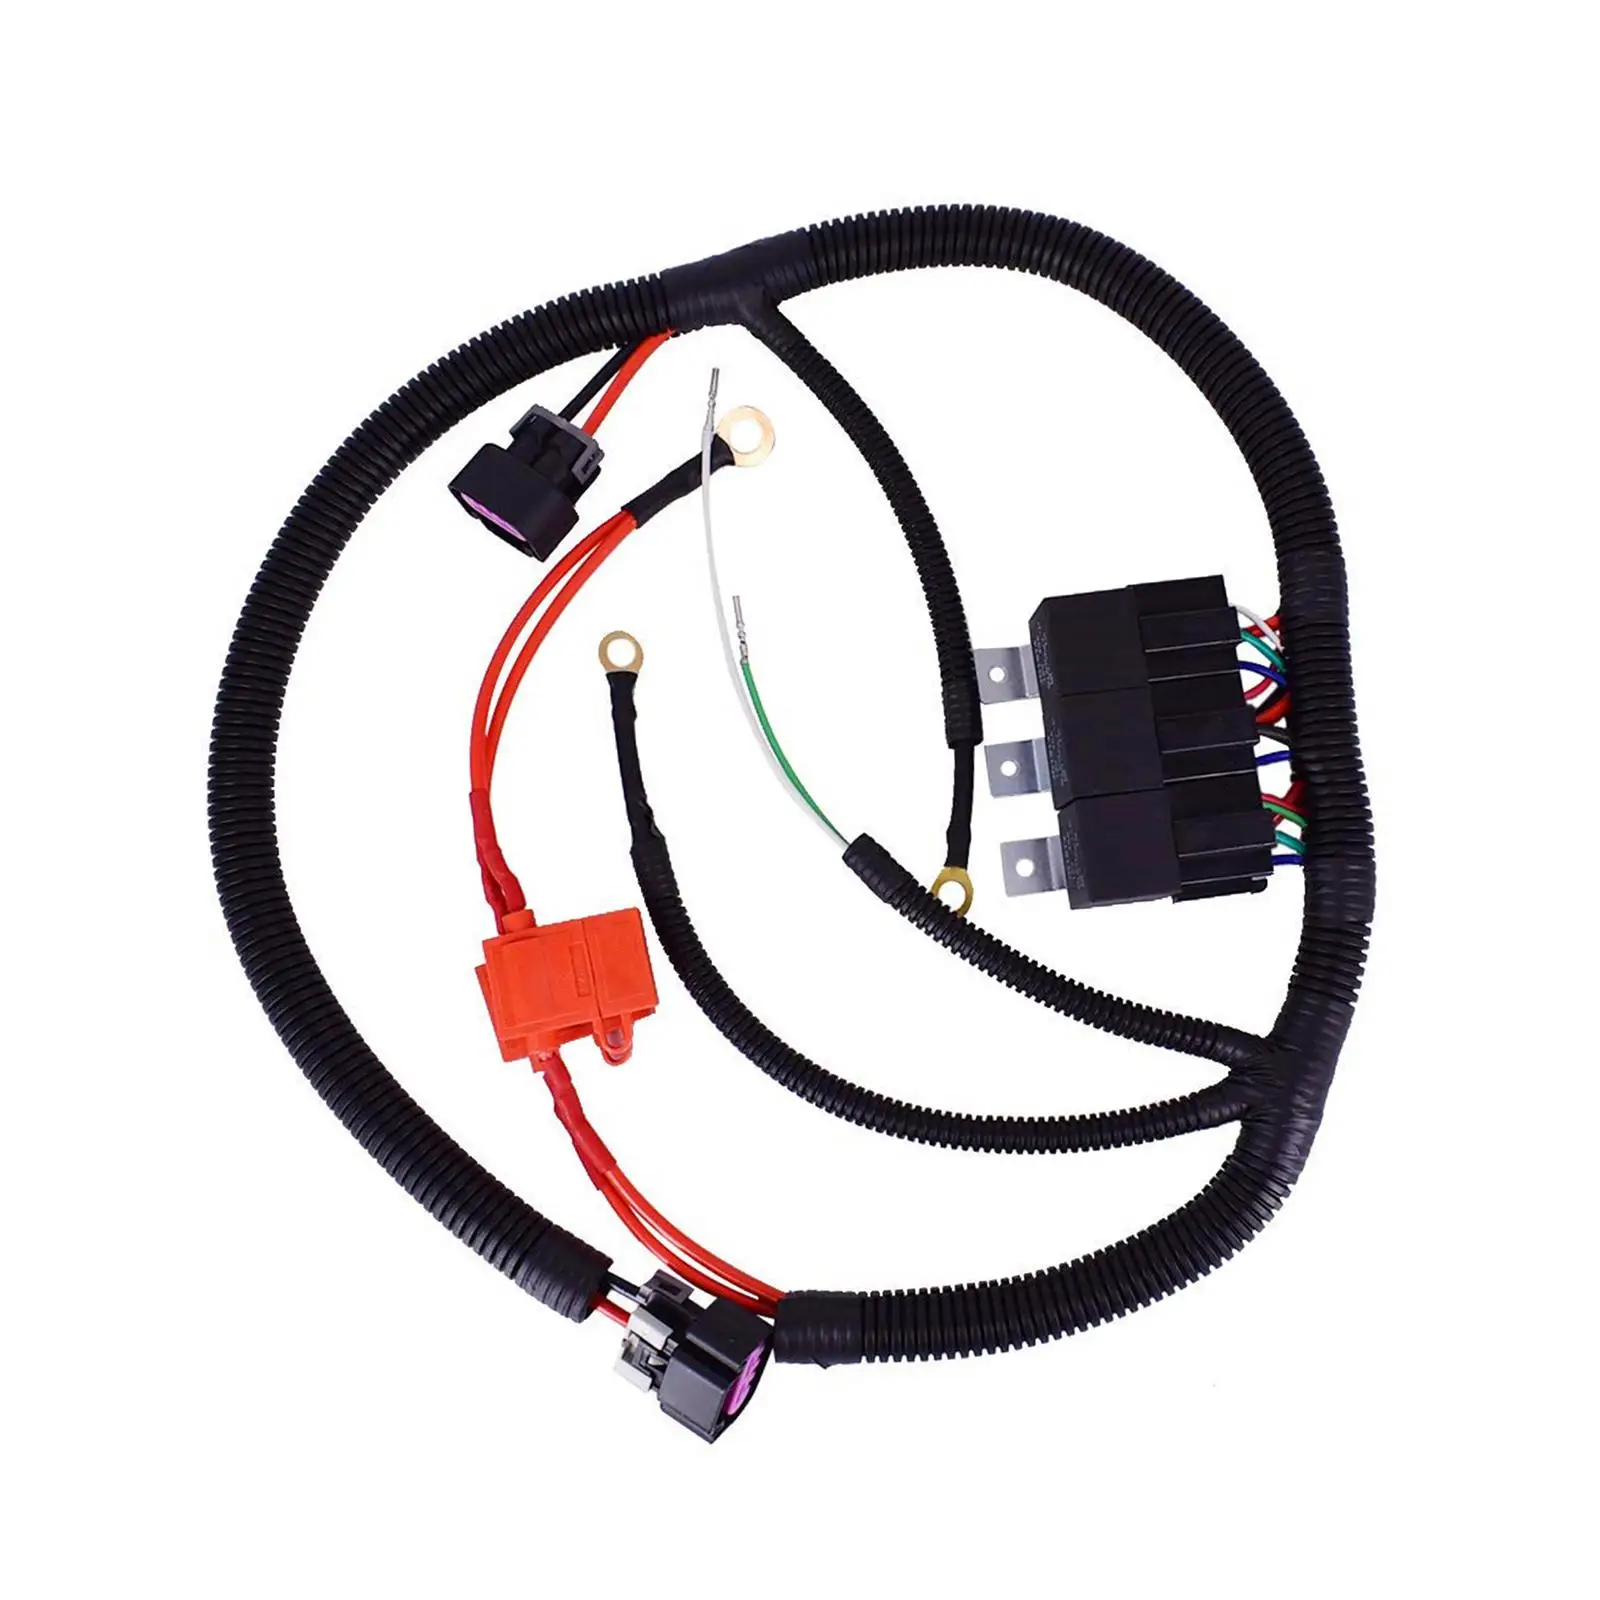 Dual Electric Fan Upgrade Wiring Harness Kit 7L5533A226T Automotive Accessories